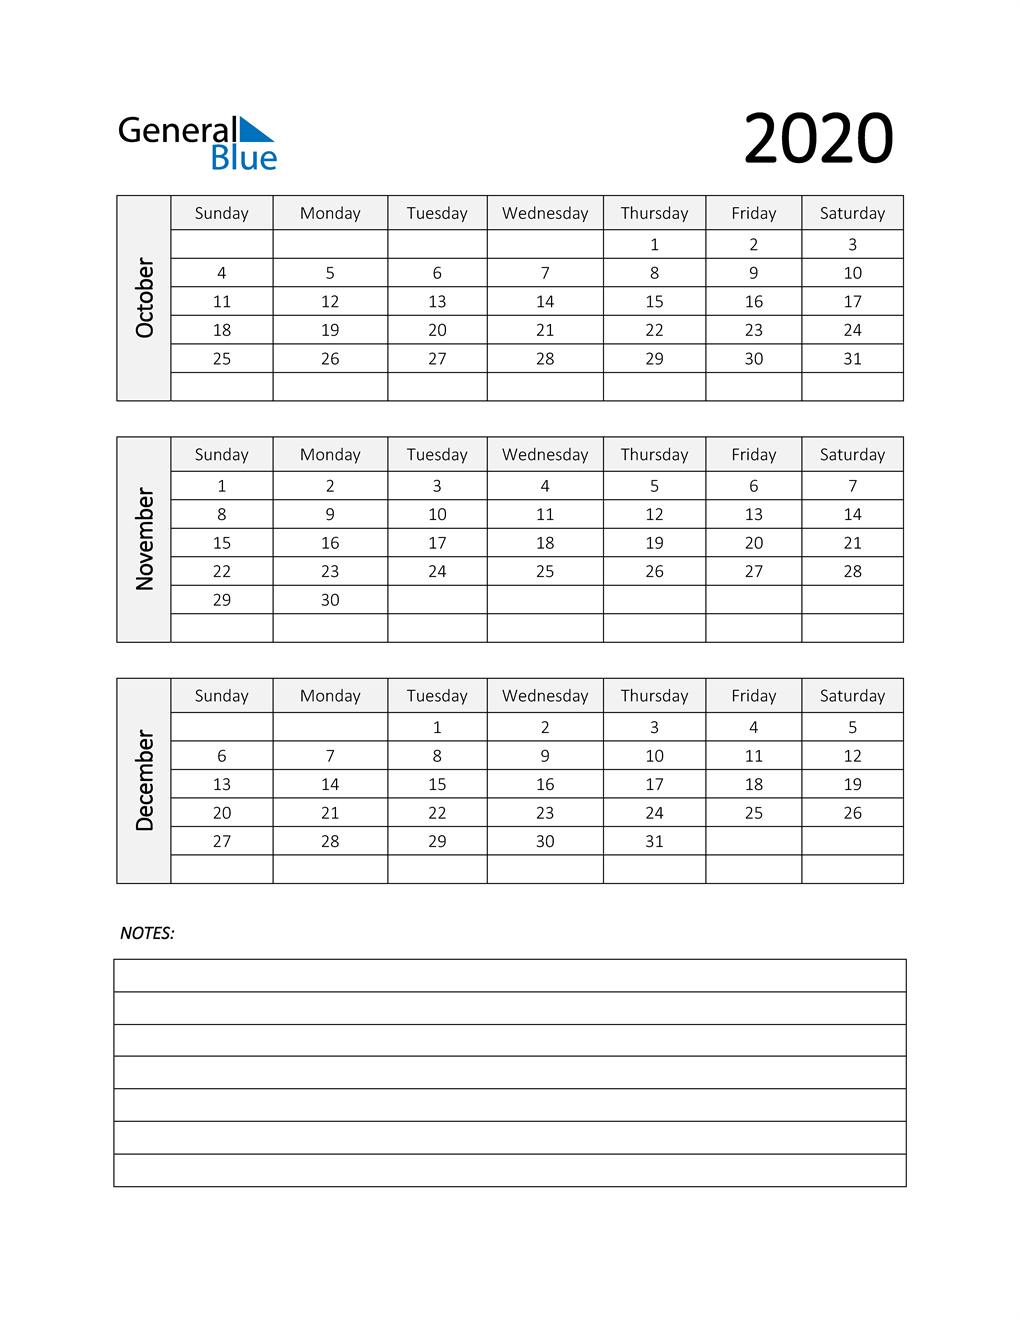  Q4 2020 Calendar with Notes